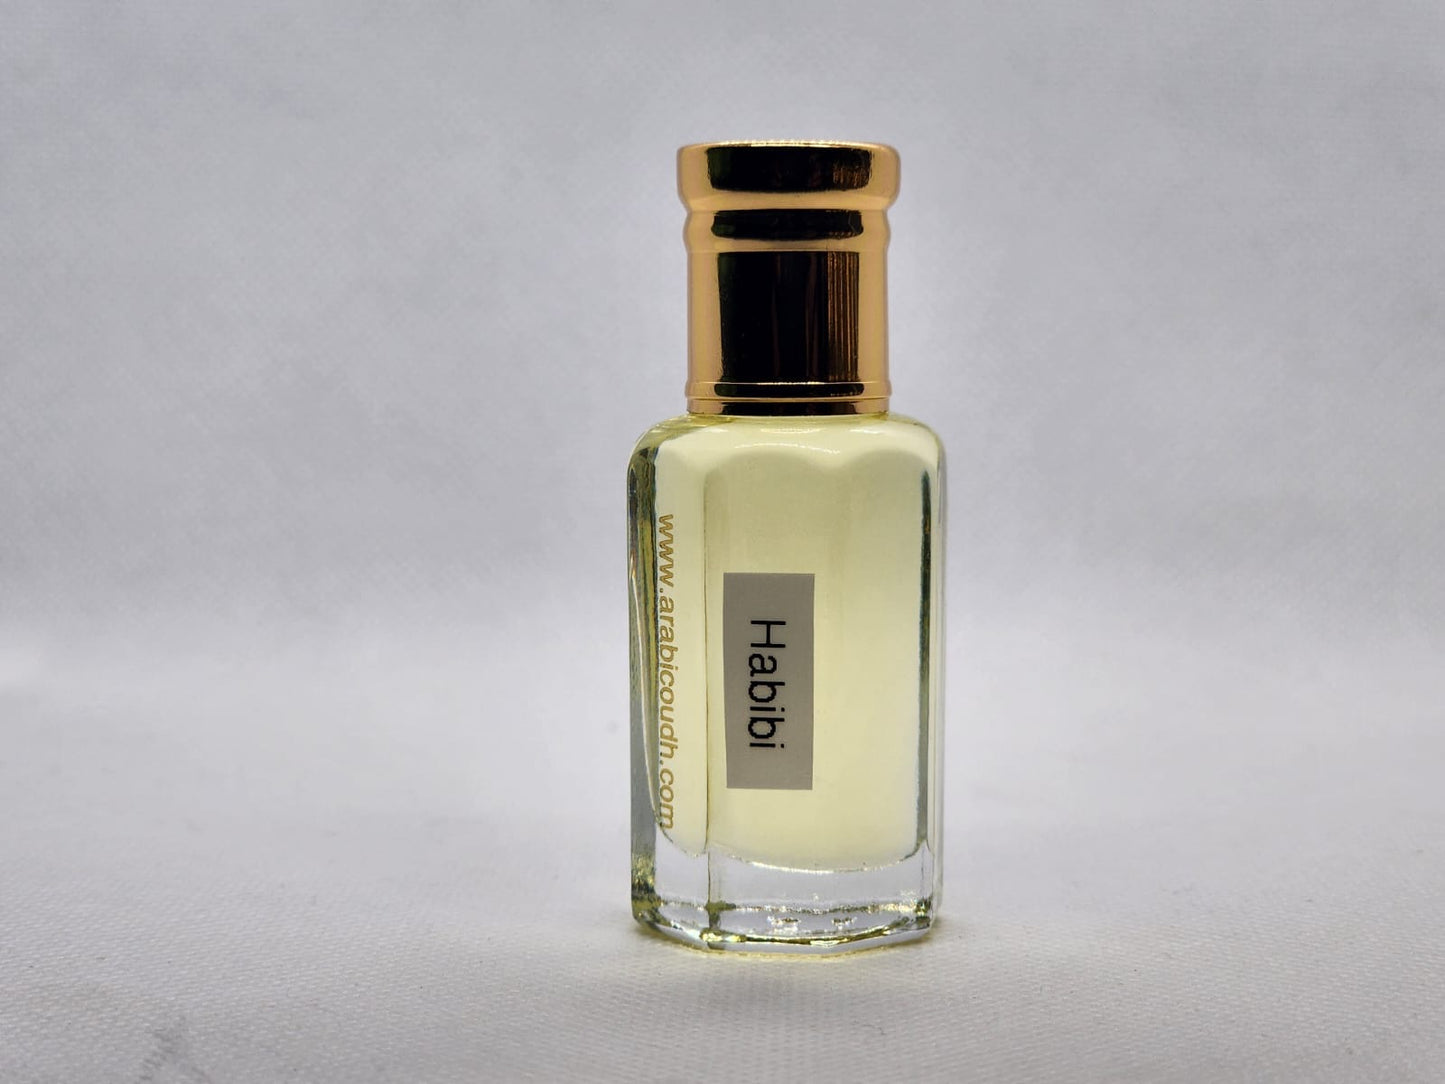 Habibi Perfume Oil / Attar - Concentrated Oil - Alcohol free